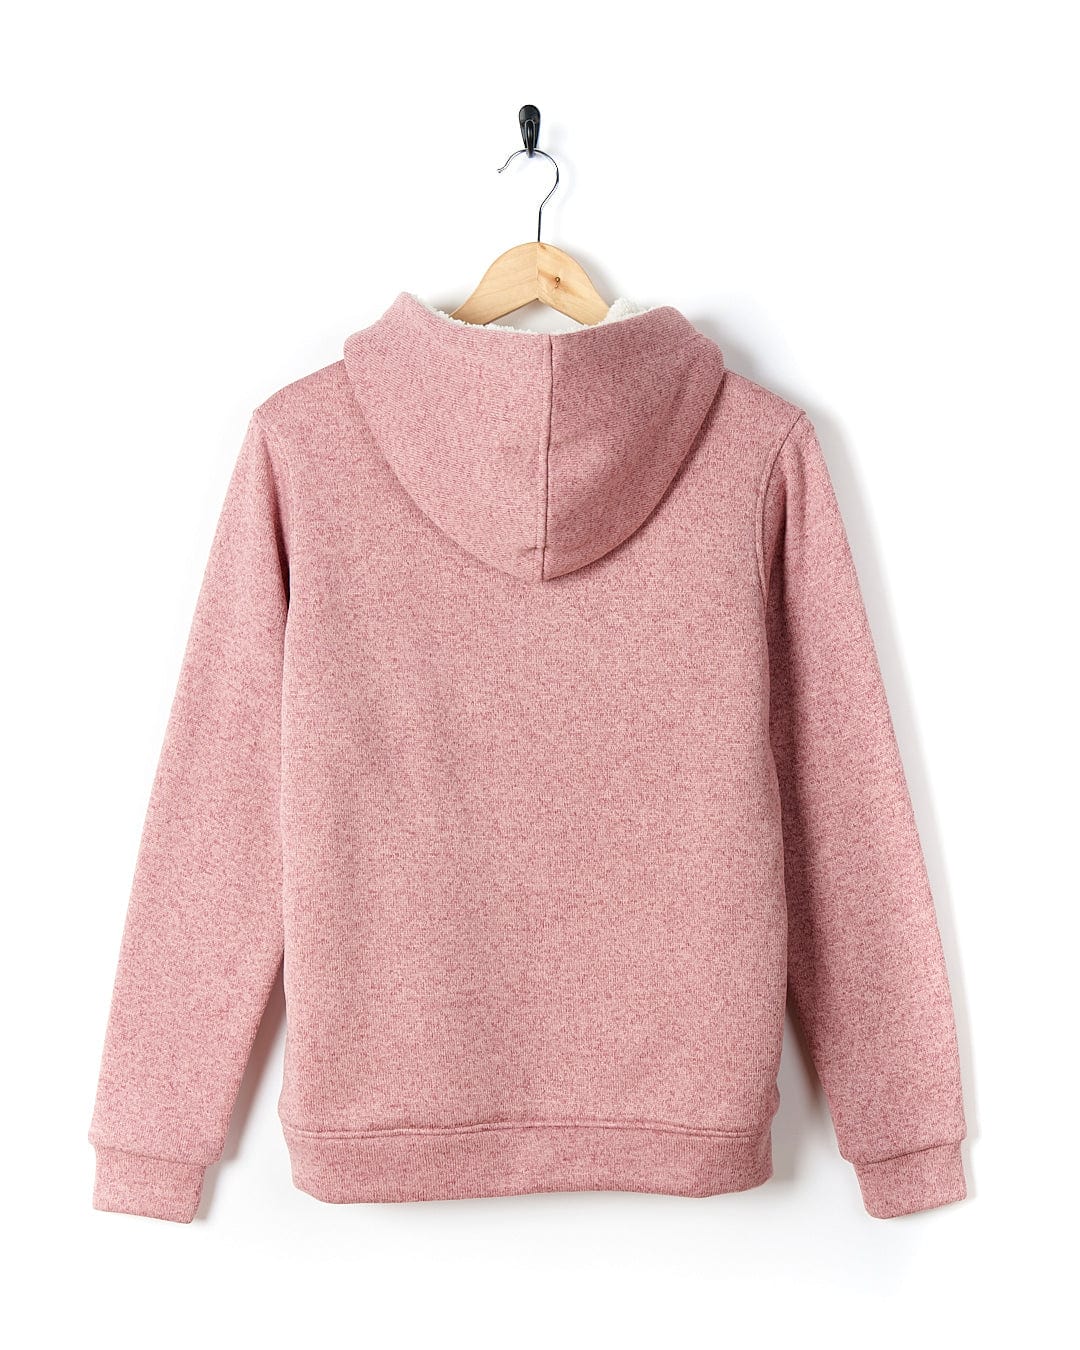 A Galak - Womens Fur Lined Hoody - Mid Pink by Saltrock hanging on a hanger.